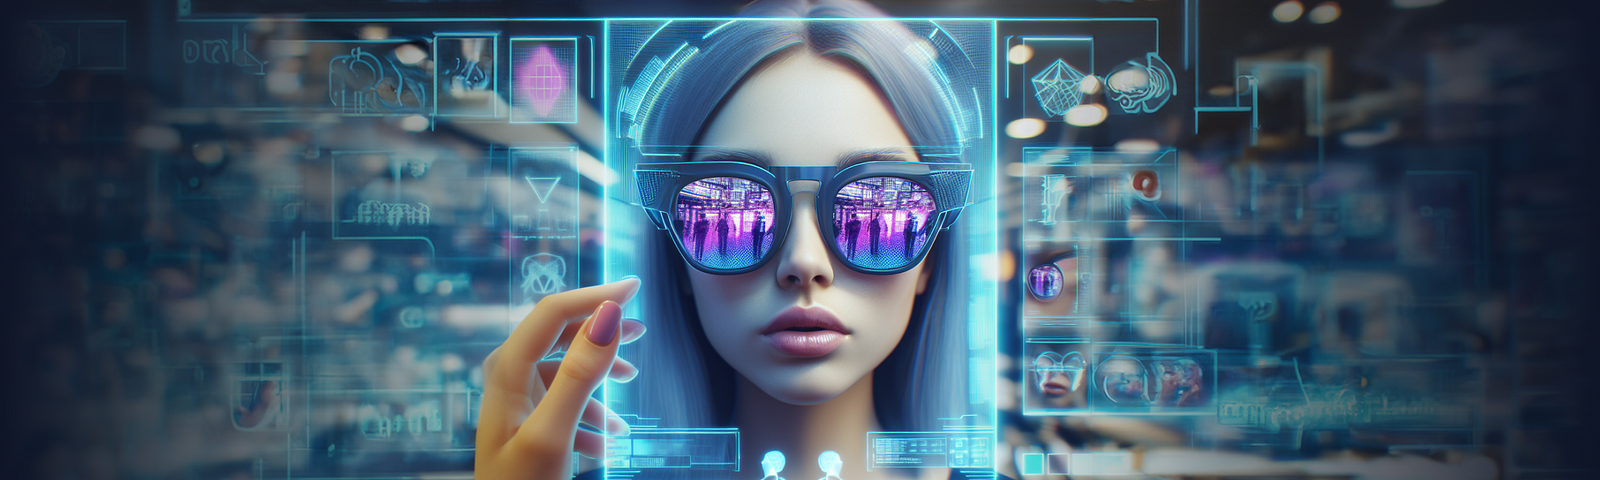 Digital artwork for ‘Eyewear Retail’s Digital Frontier: AR and 3D Integration’ showcasing a woman wearing futuristic AR glasses, with holographic interfaces and digital elements floating around her. The eyewear reflects a vibrant cityscape while various abstract symbols and icons related to technology, connectivity, and eyewear fashion appear translucently in the foreground. The image conveys a sense of advanced technology integrated into the retail experience of Designhubz.